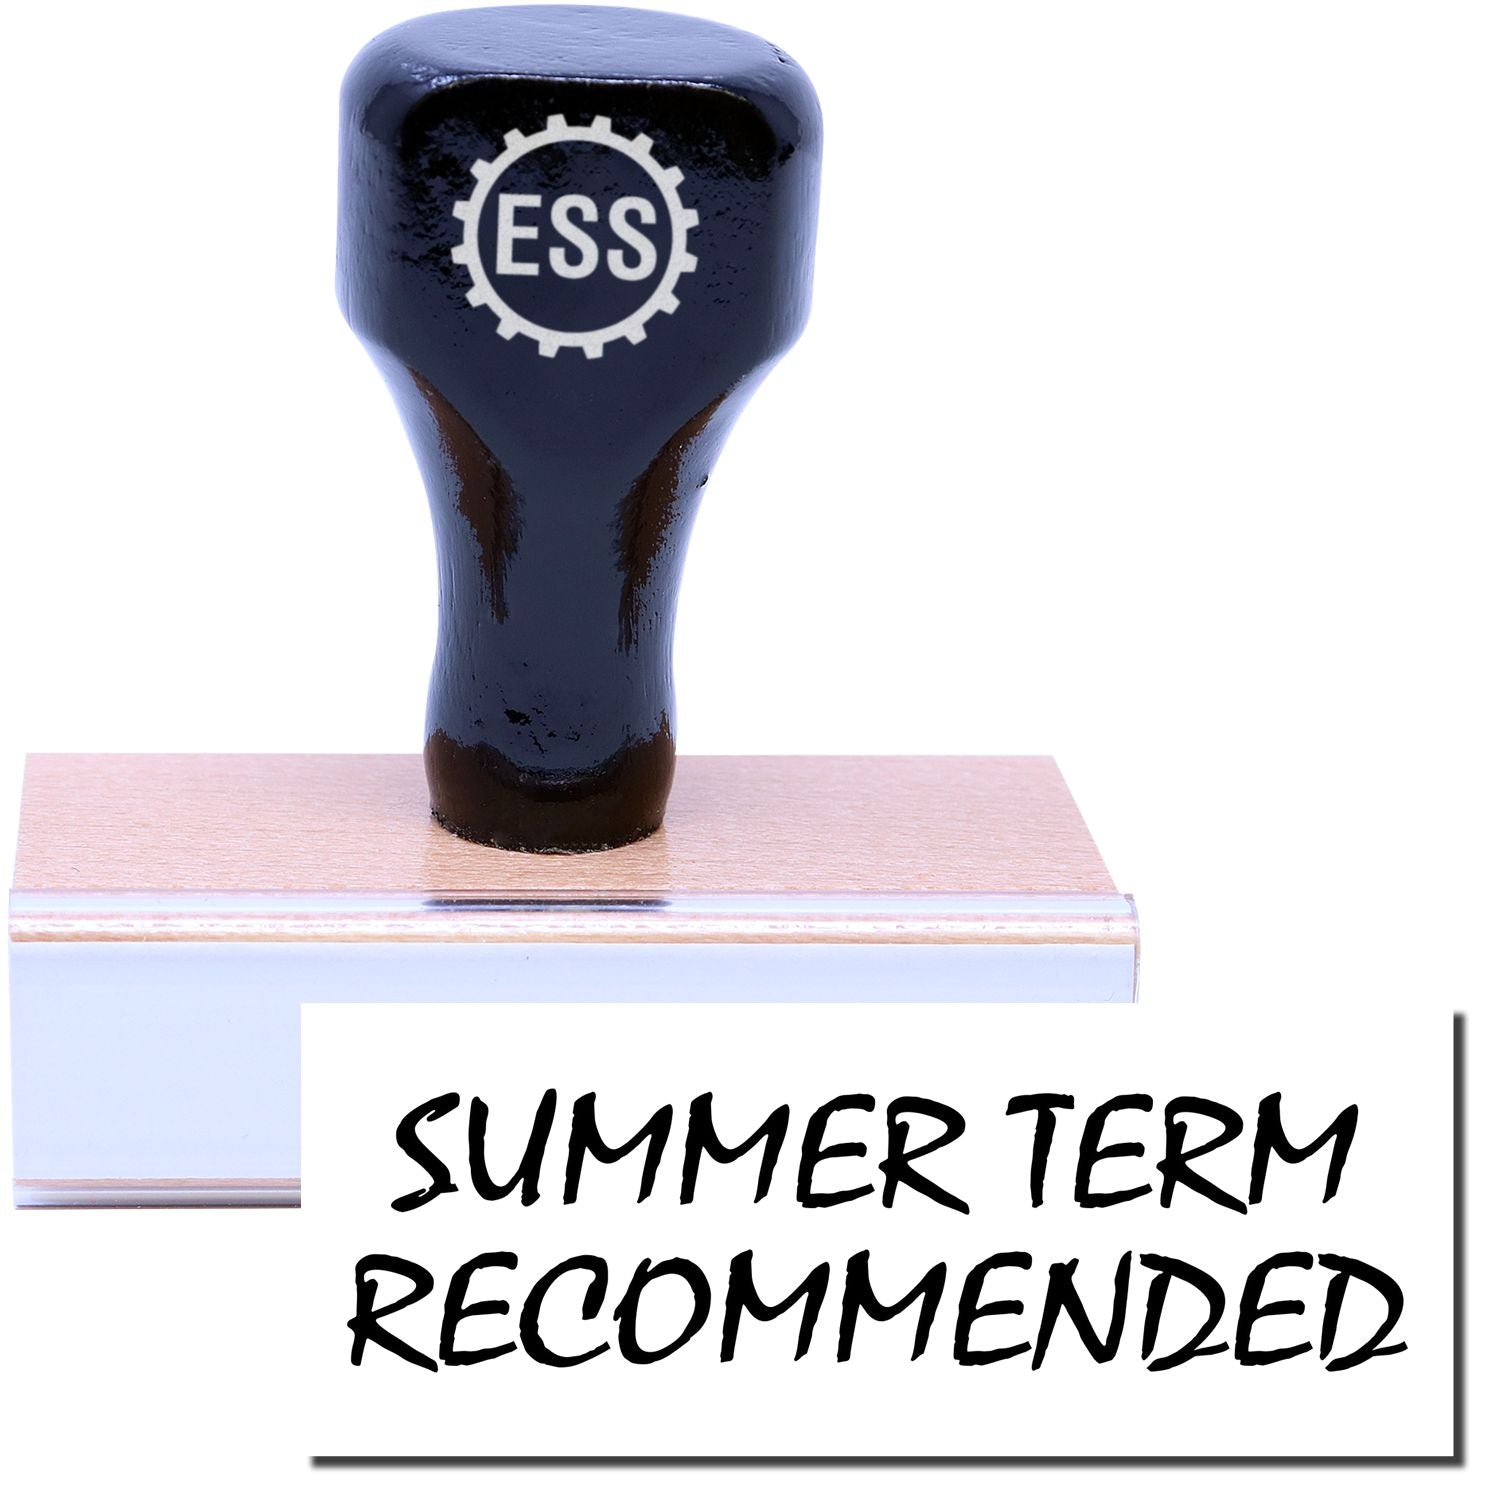 A stock office rubber stamp with a stamped image showing how the text "SUMMER TERM RECOMMENDED" is displayed after stamping.